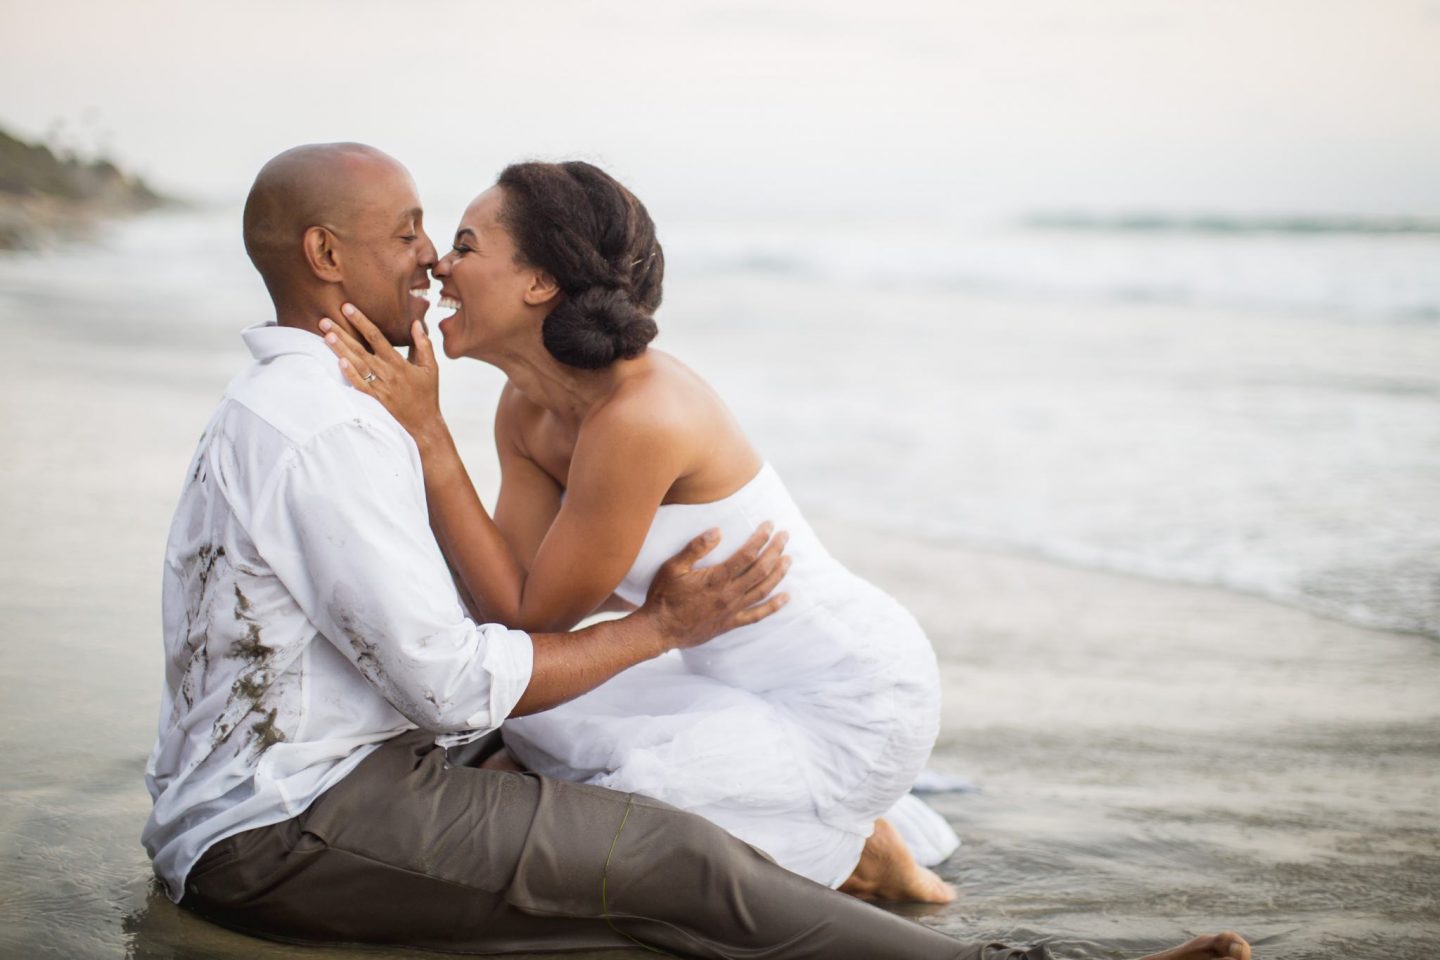 30-day sex challenge
intimacy in marriage